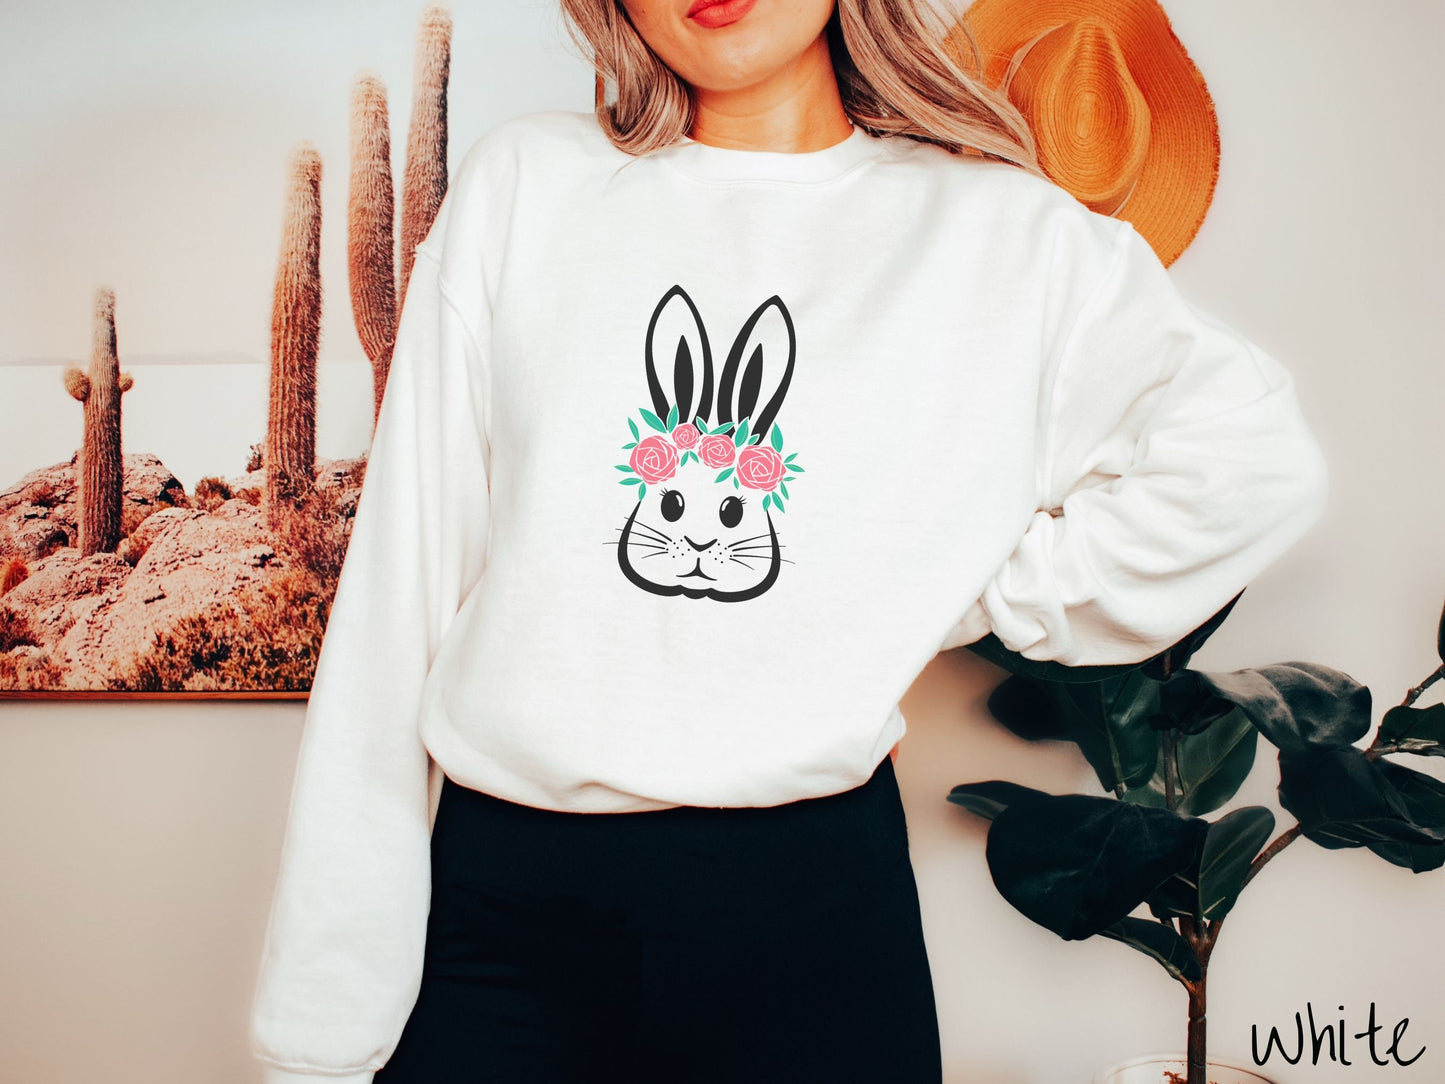 A woman wearing a cute, vintage white colored sweatshirt with a black outline of a bunny rabbit with eyelashes, whiskers, and floppy ears that has a pink flowered headband resting below its large ears.